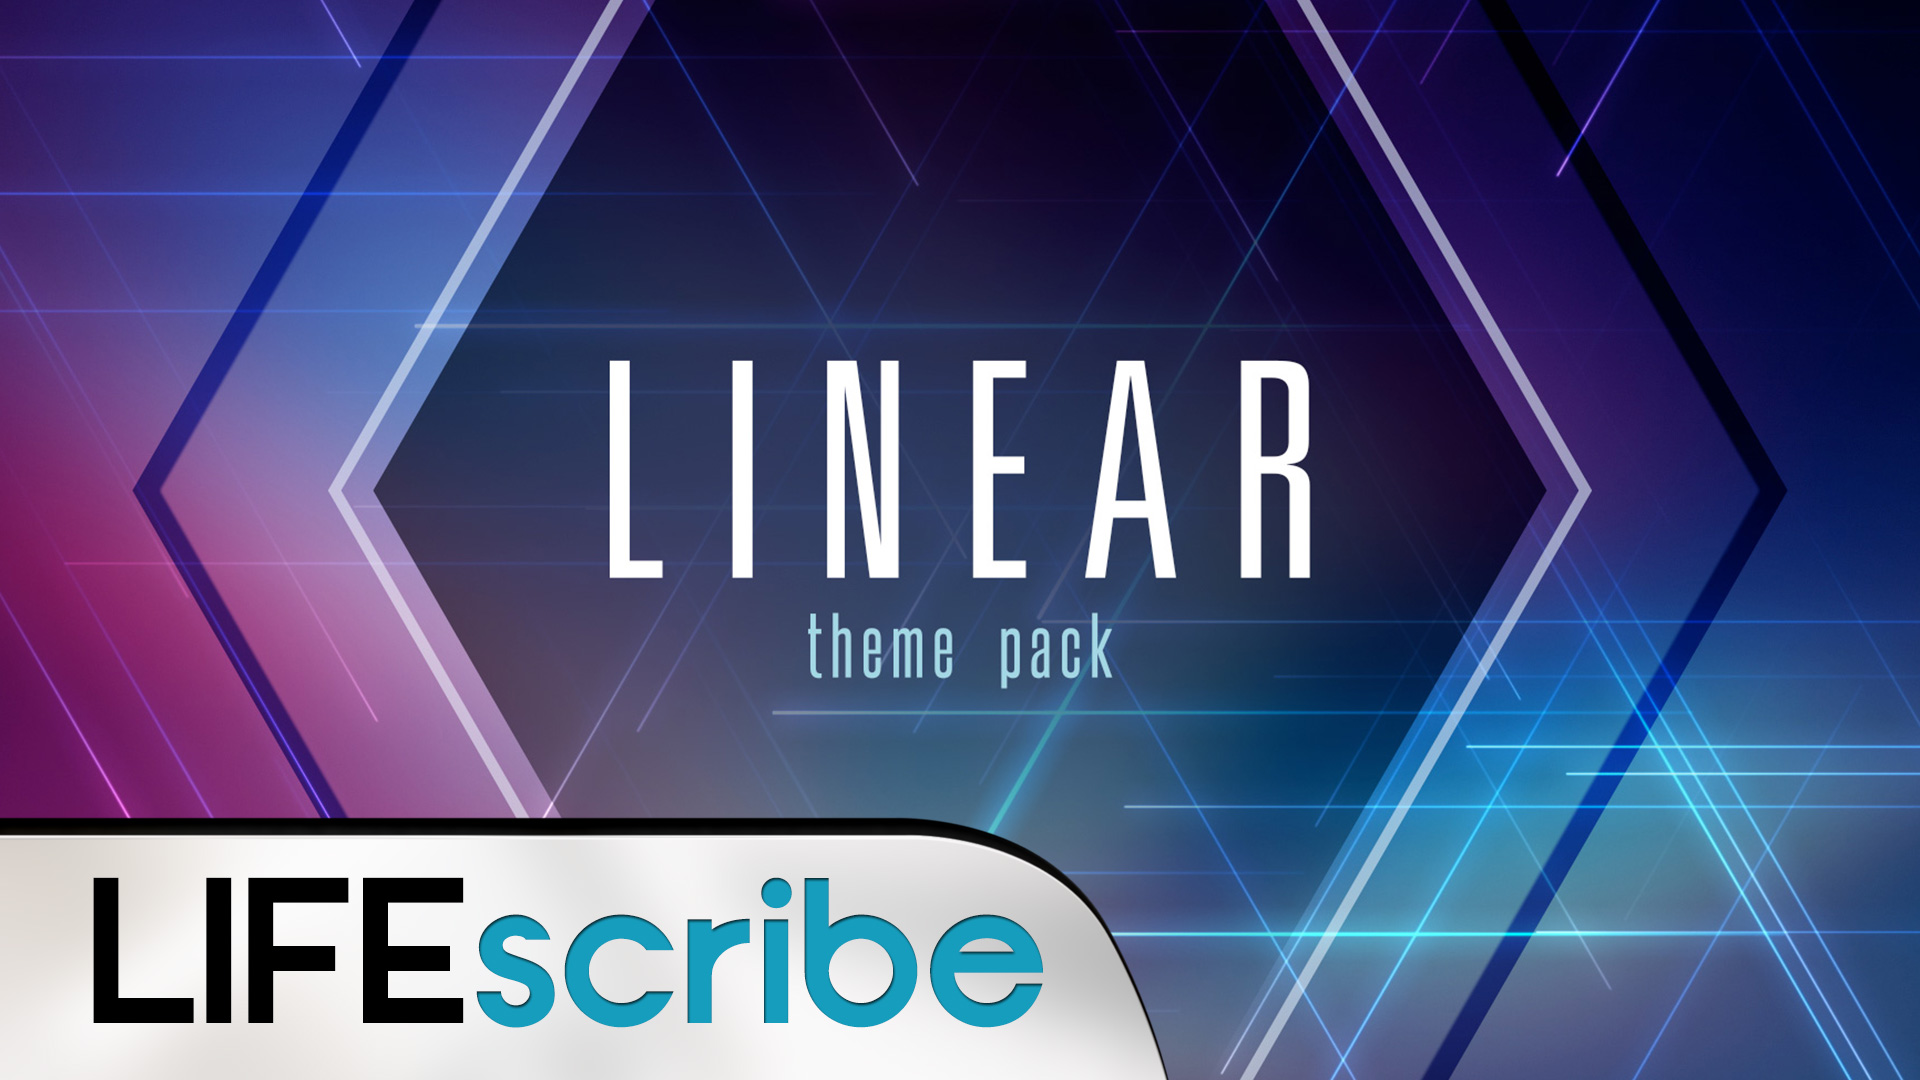 Linear Theme Pack